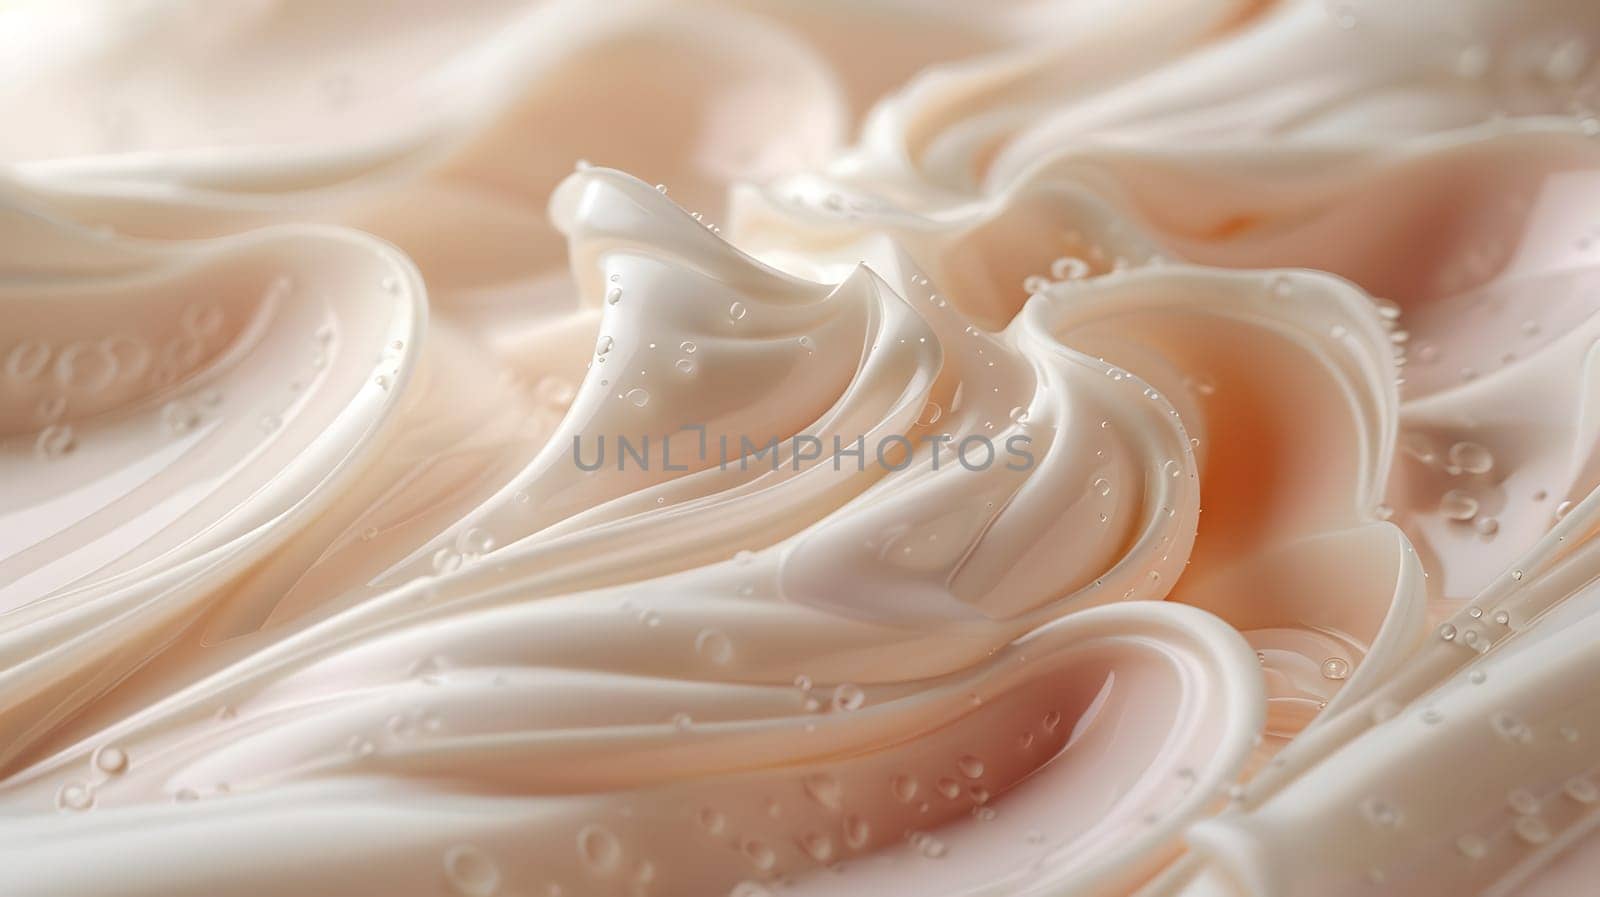 A close up of whipped cream on a cake, a staple food in many cuisines. This creamy ingredient beautifully complements the peach petals as a delicious topping